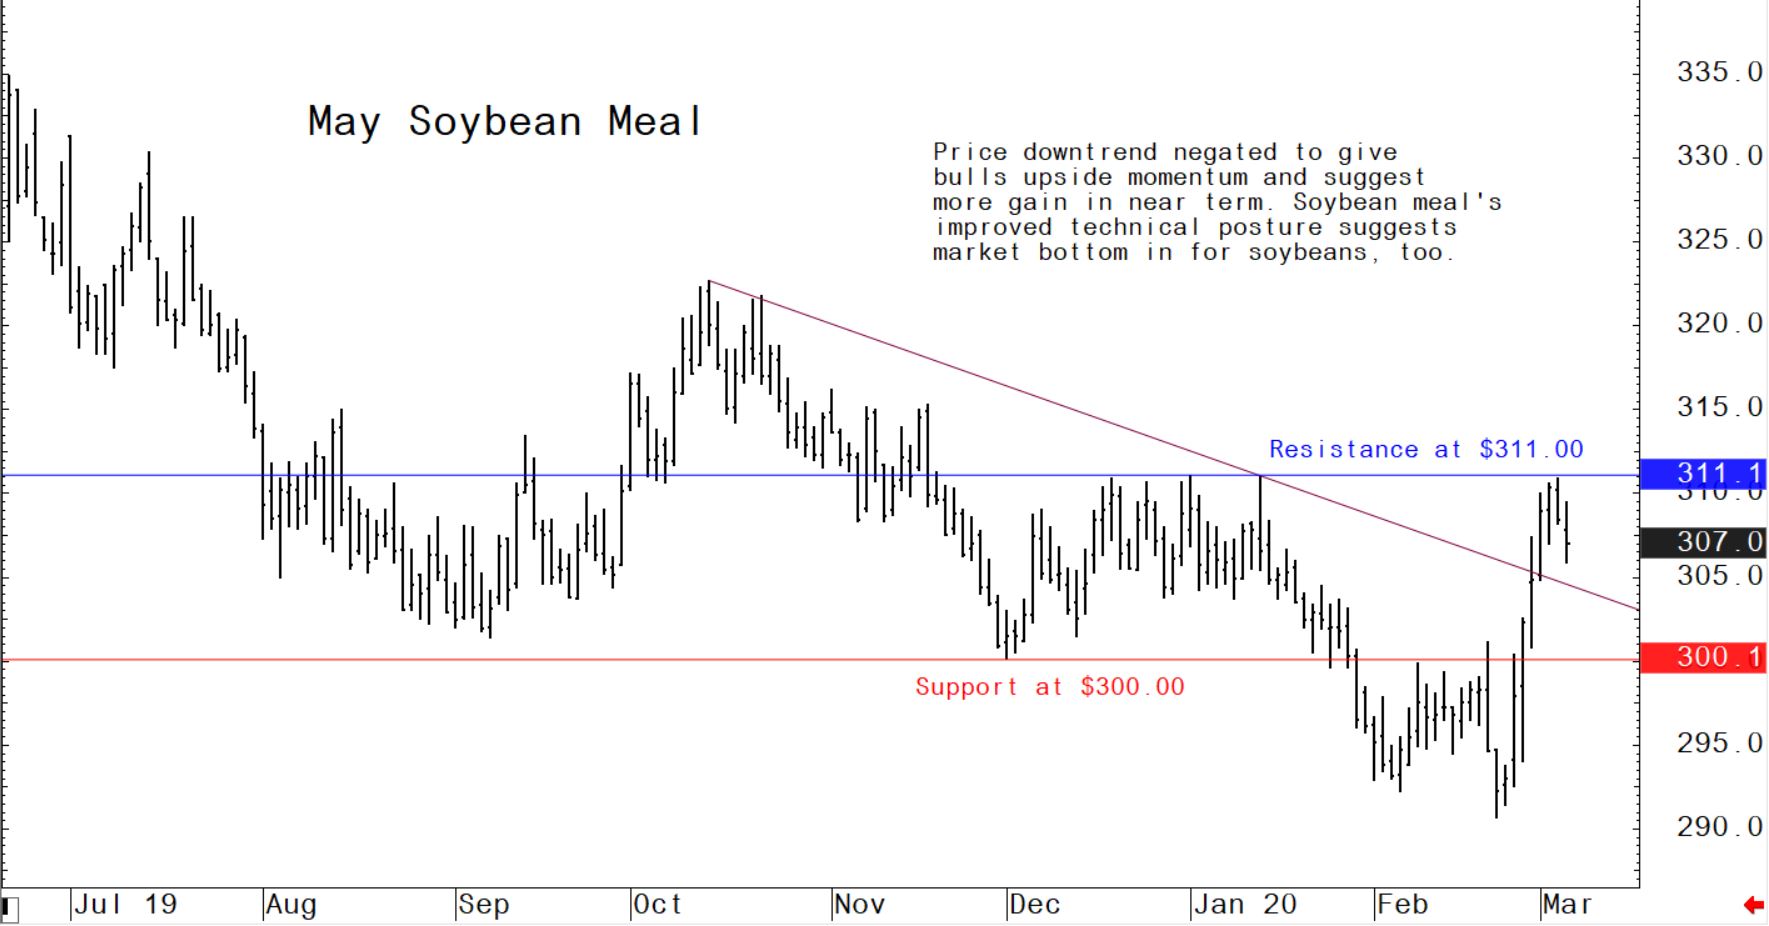 Price downtrend negated to give bulls upside momentum and suggest more gain in near term. Soybean meal's improved technical posture suggests market bottom in for soybeans, too